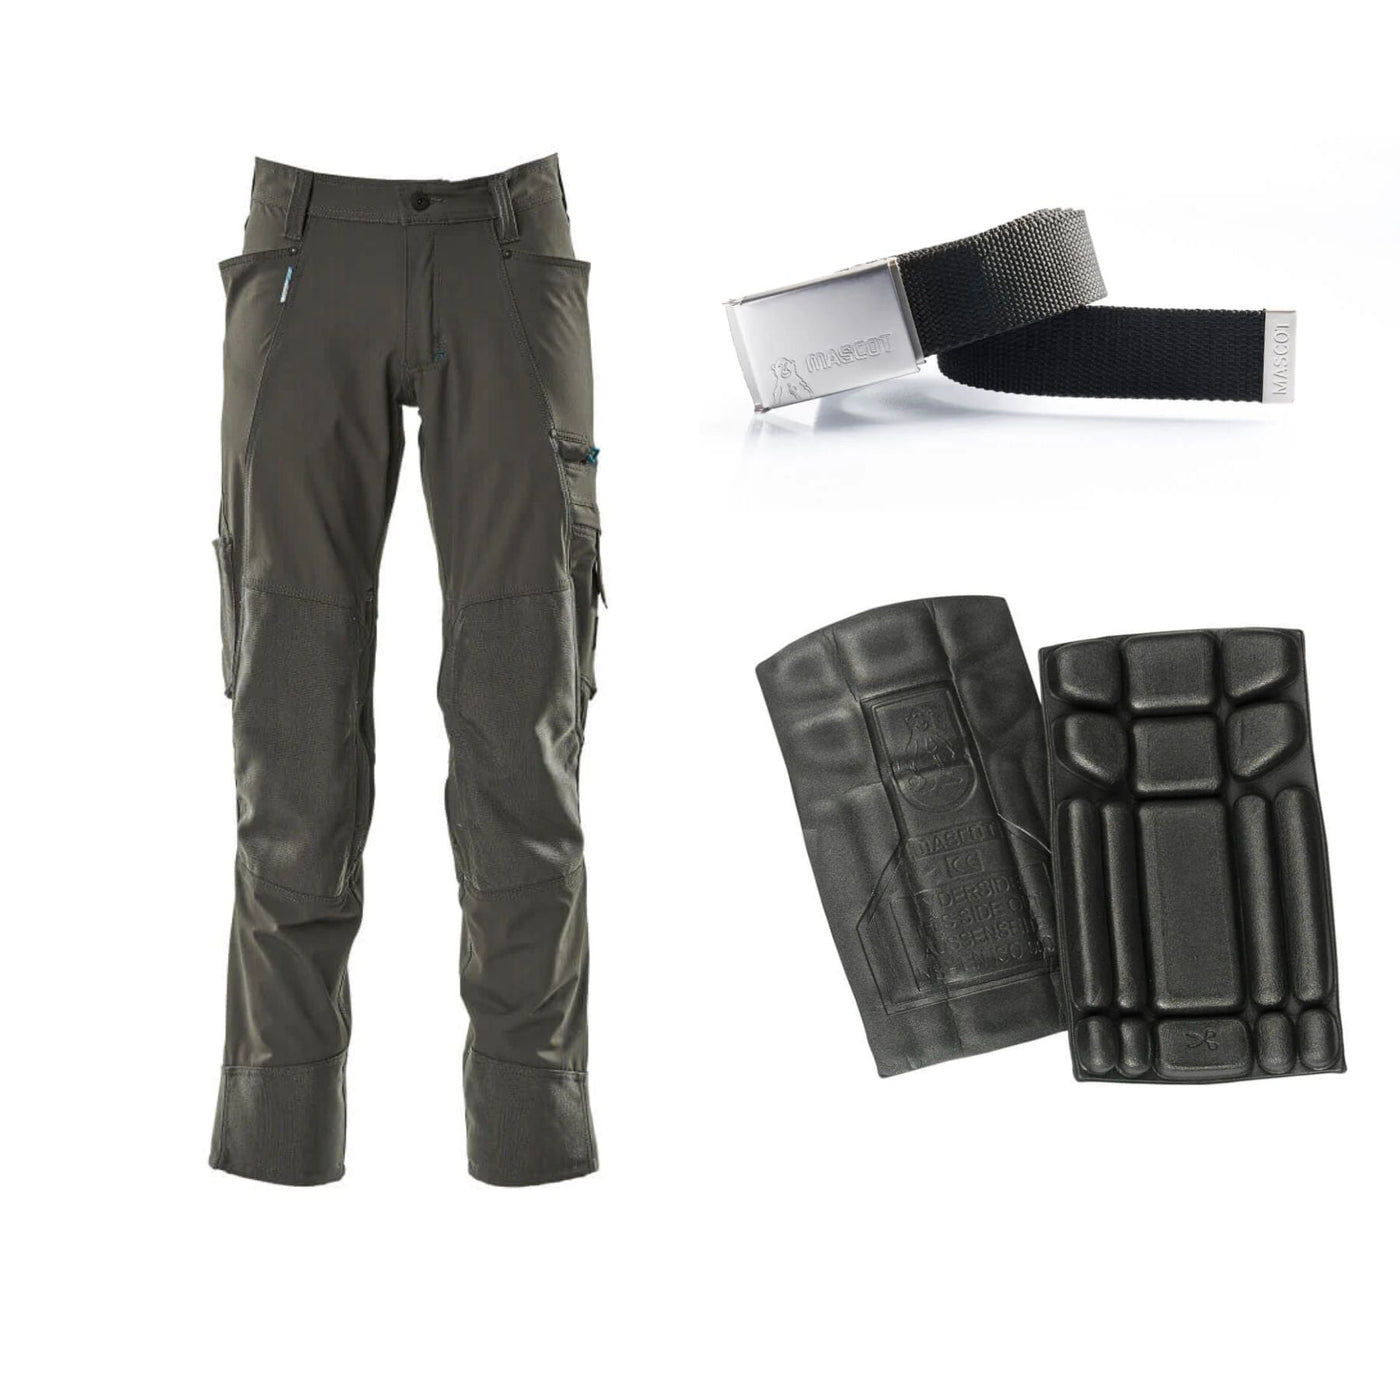 Mascot Special Offer 17179-311 Advanced Trousers Pack - 4-Way-Stretch Trousers + Belt + Knee Pads